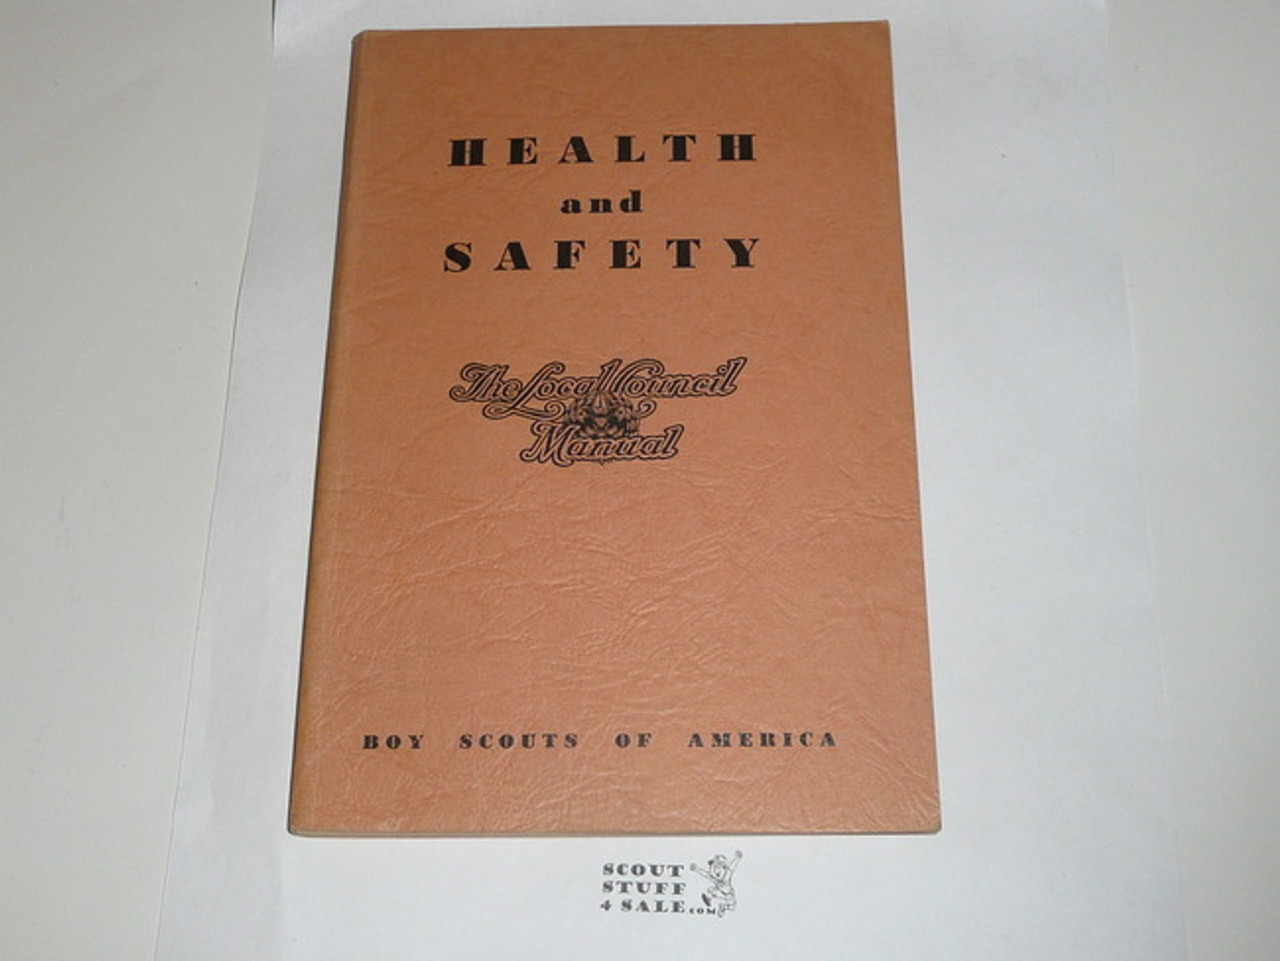 1950 Health & Safety, Local Council Manual Series, 12-50 printing